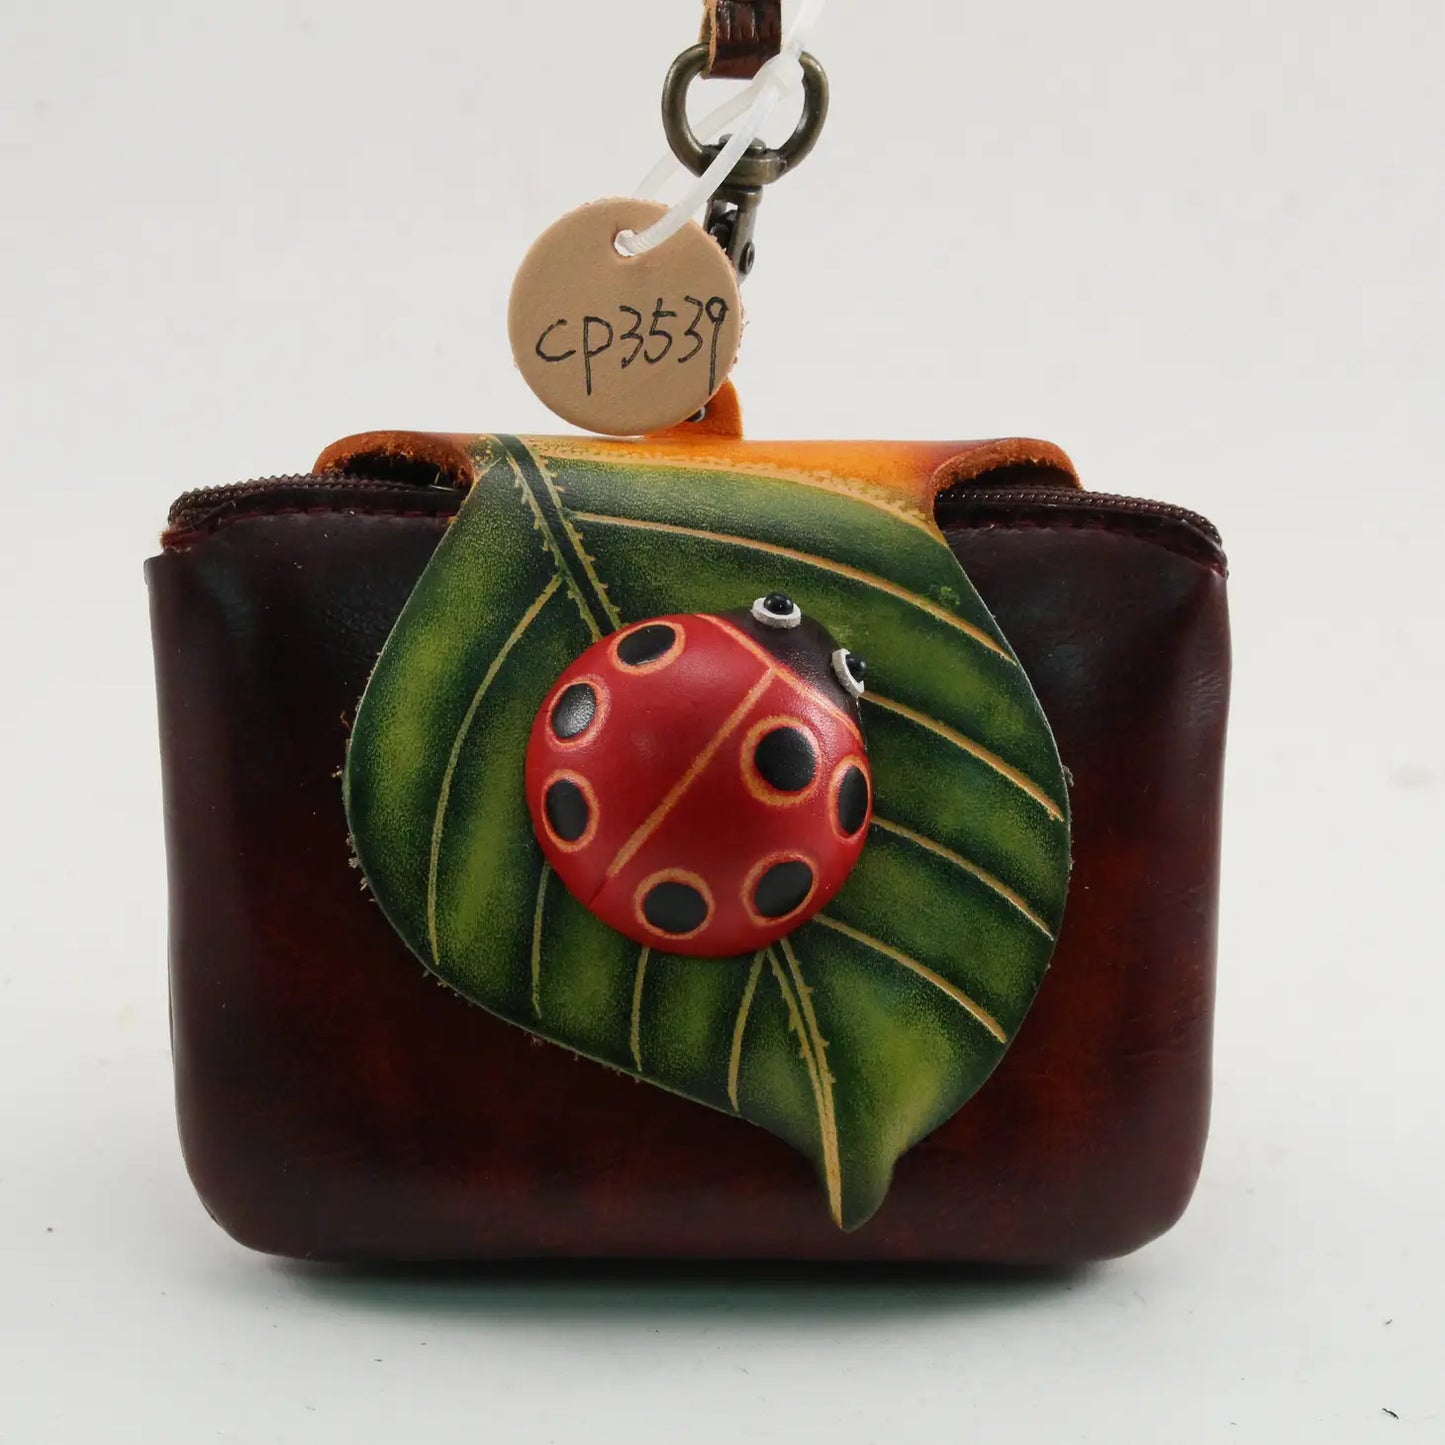 Ladybug Wristlet - Green Leather Coin Purse Wallet